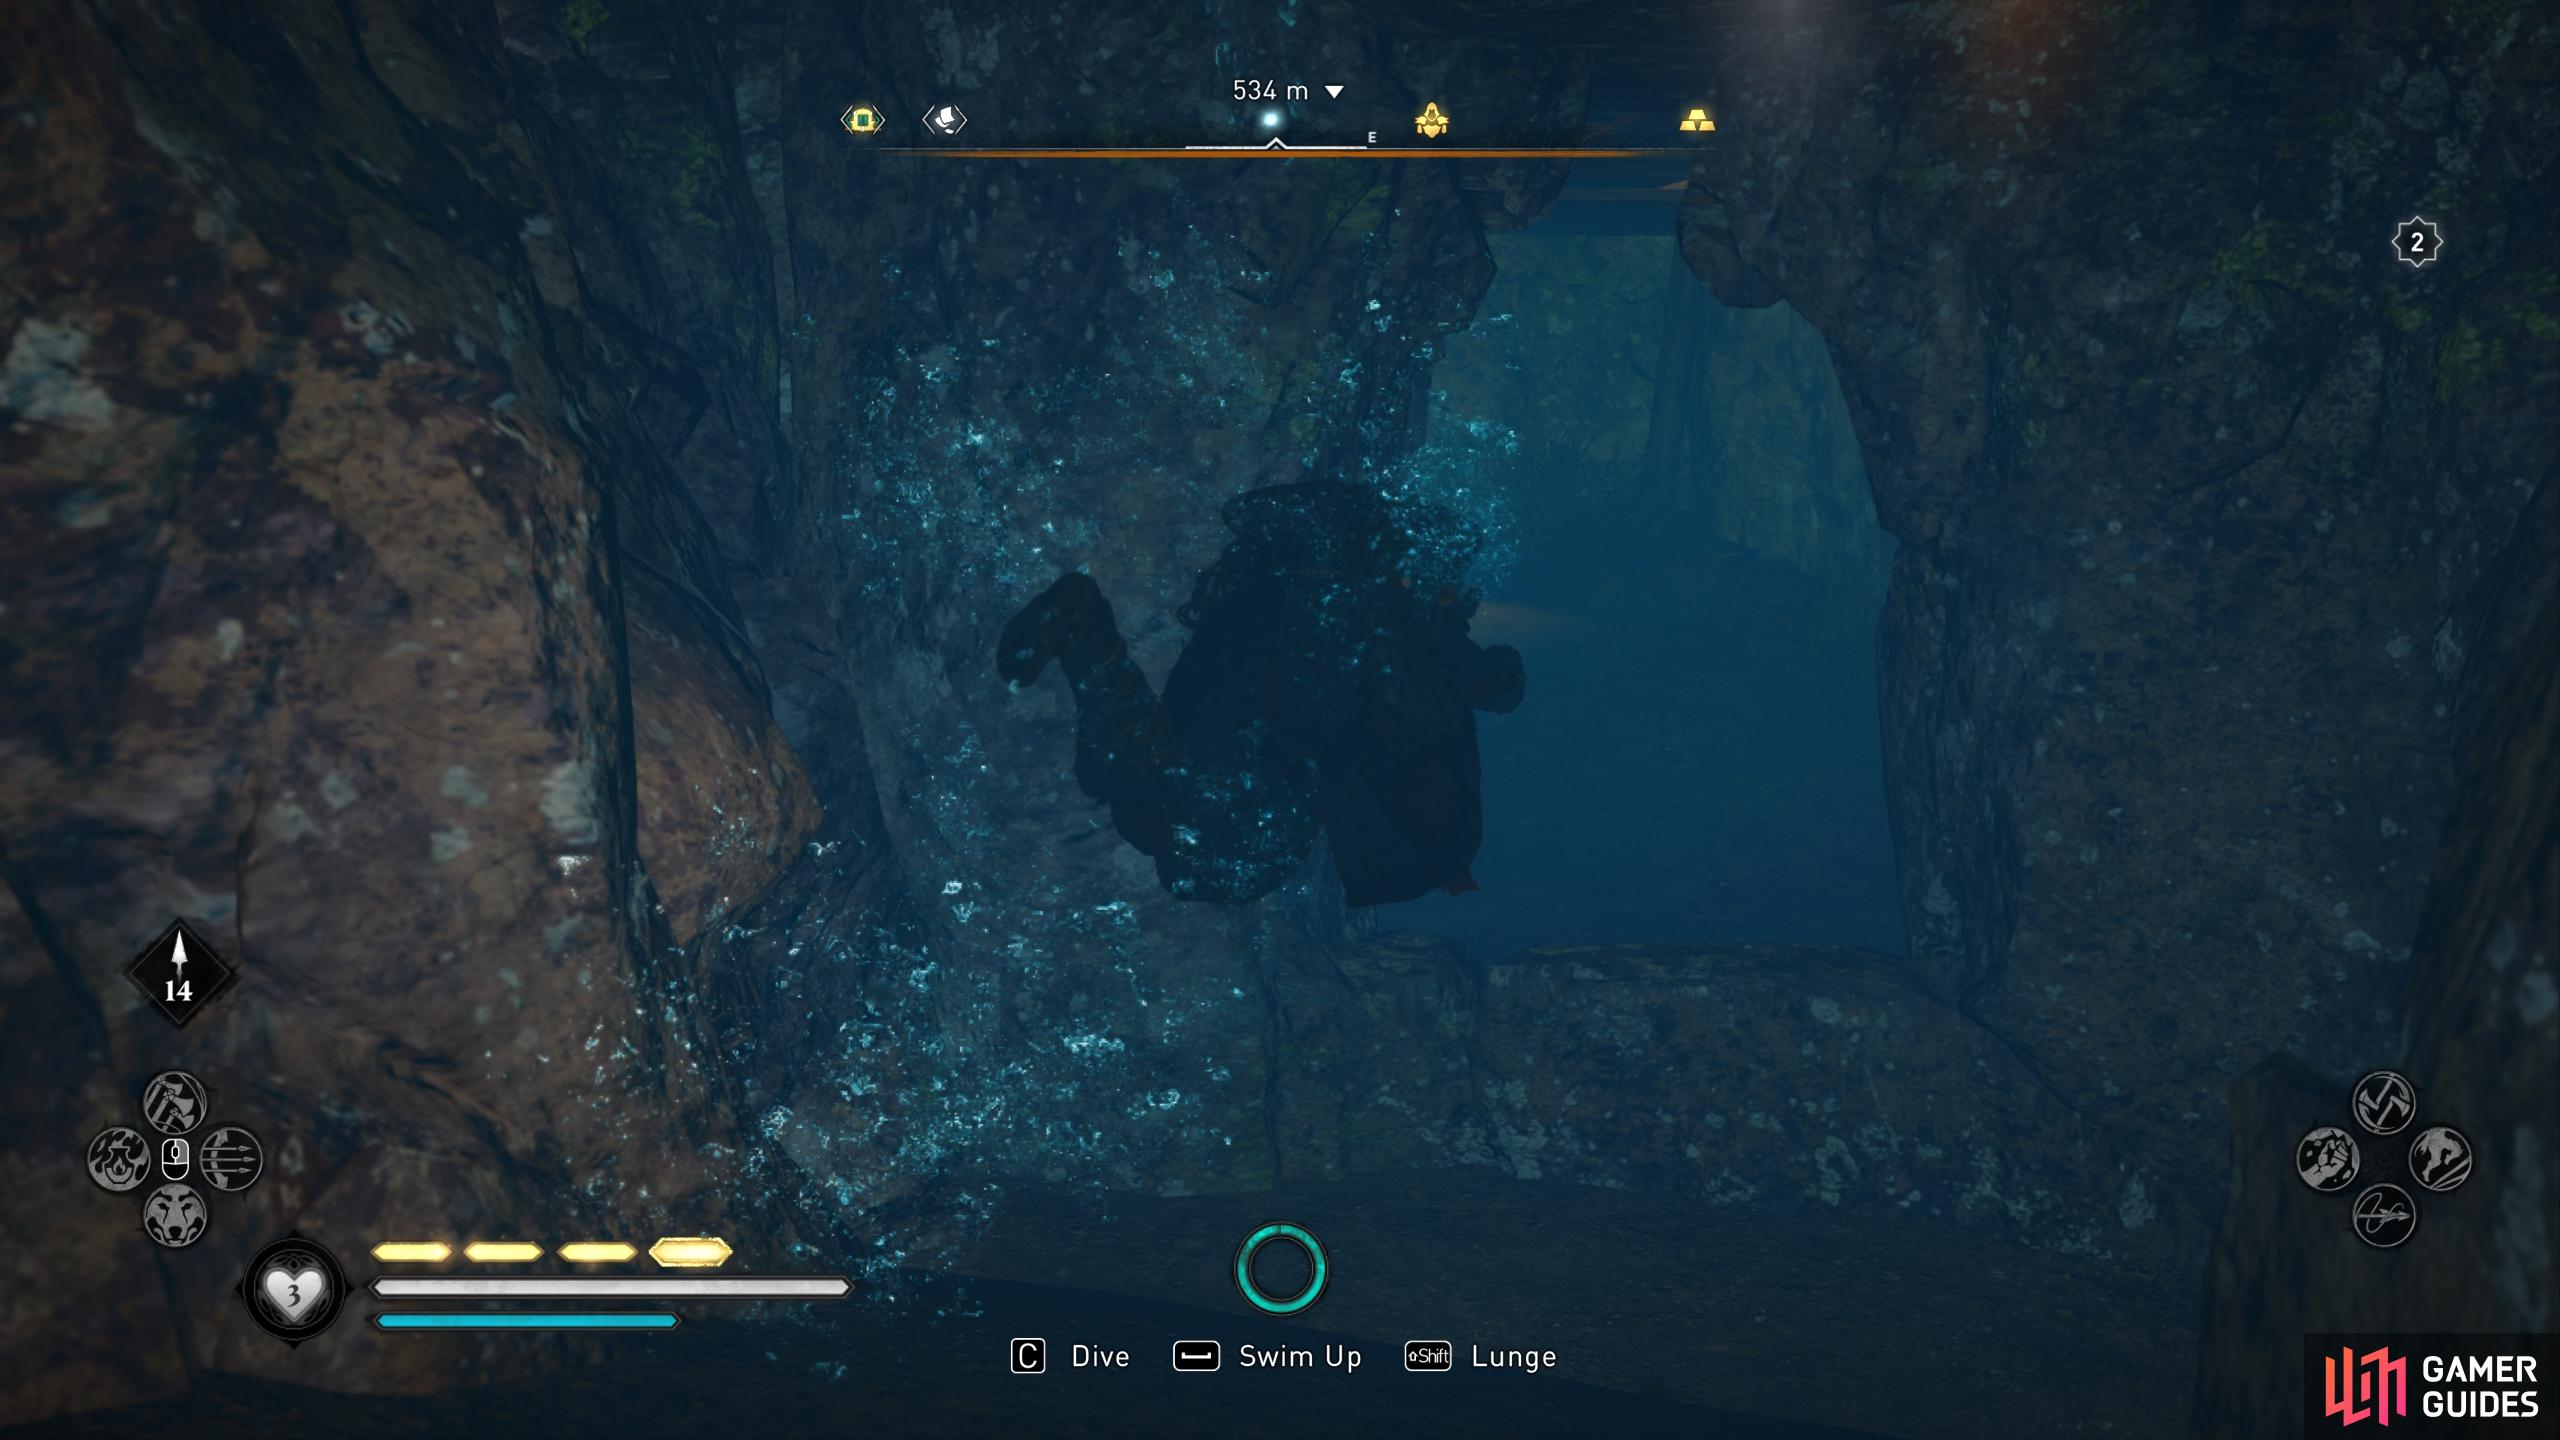 Once you're in the cave, dive under the water and through the hole to the other side.